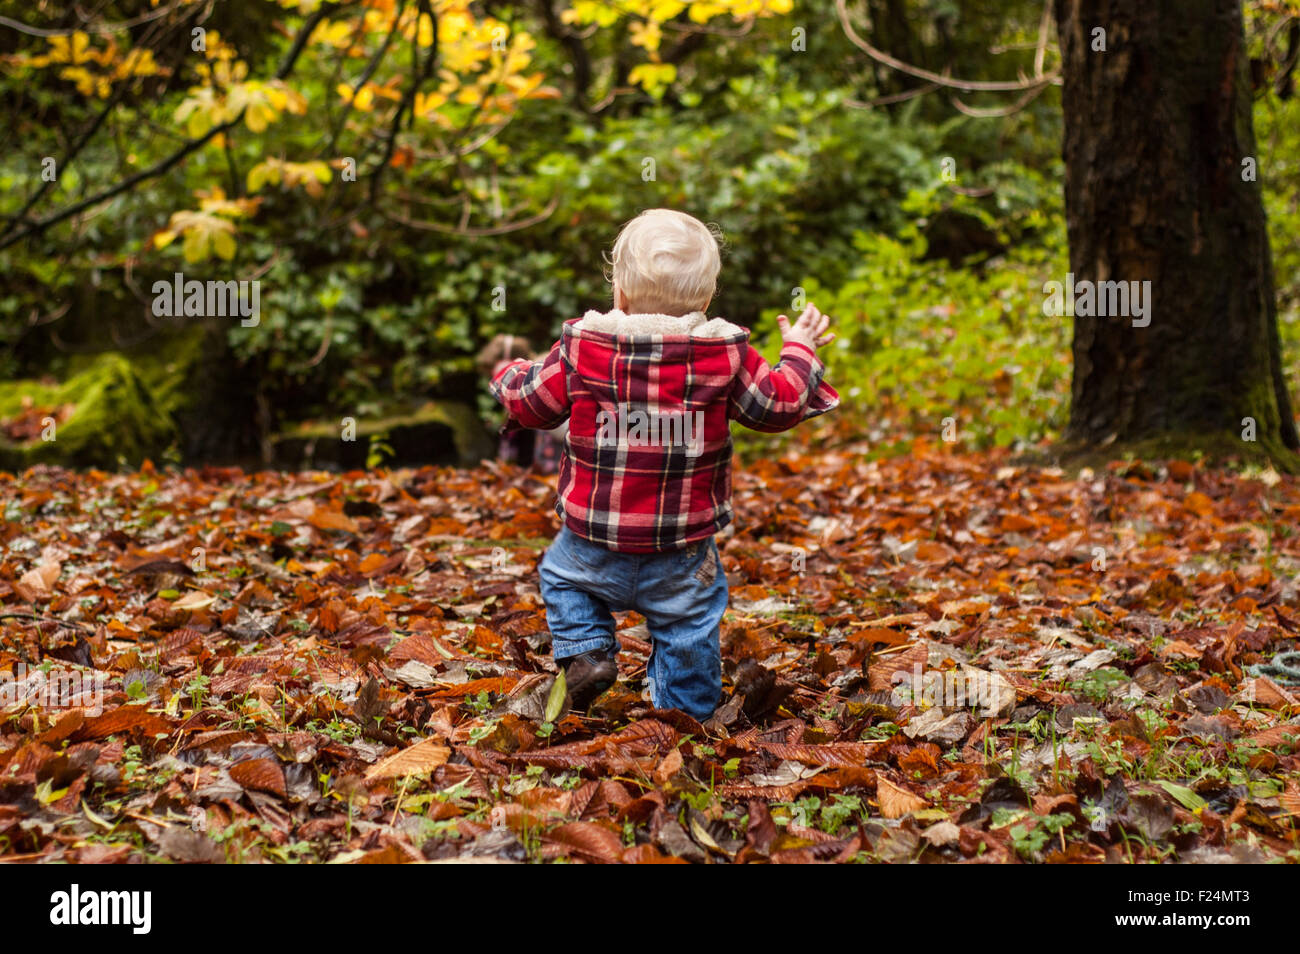 A toddler boy off on an adventure in the autumn leaves Stock Photo